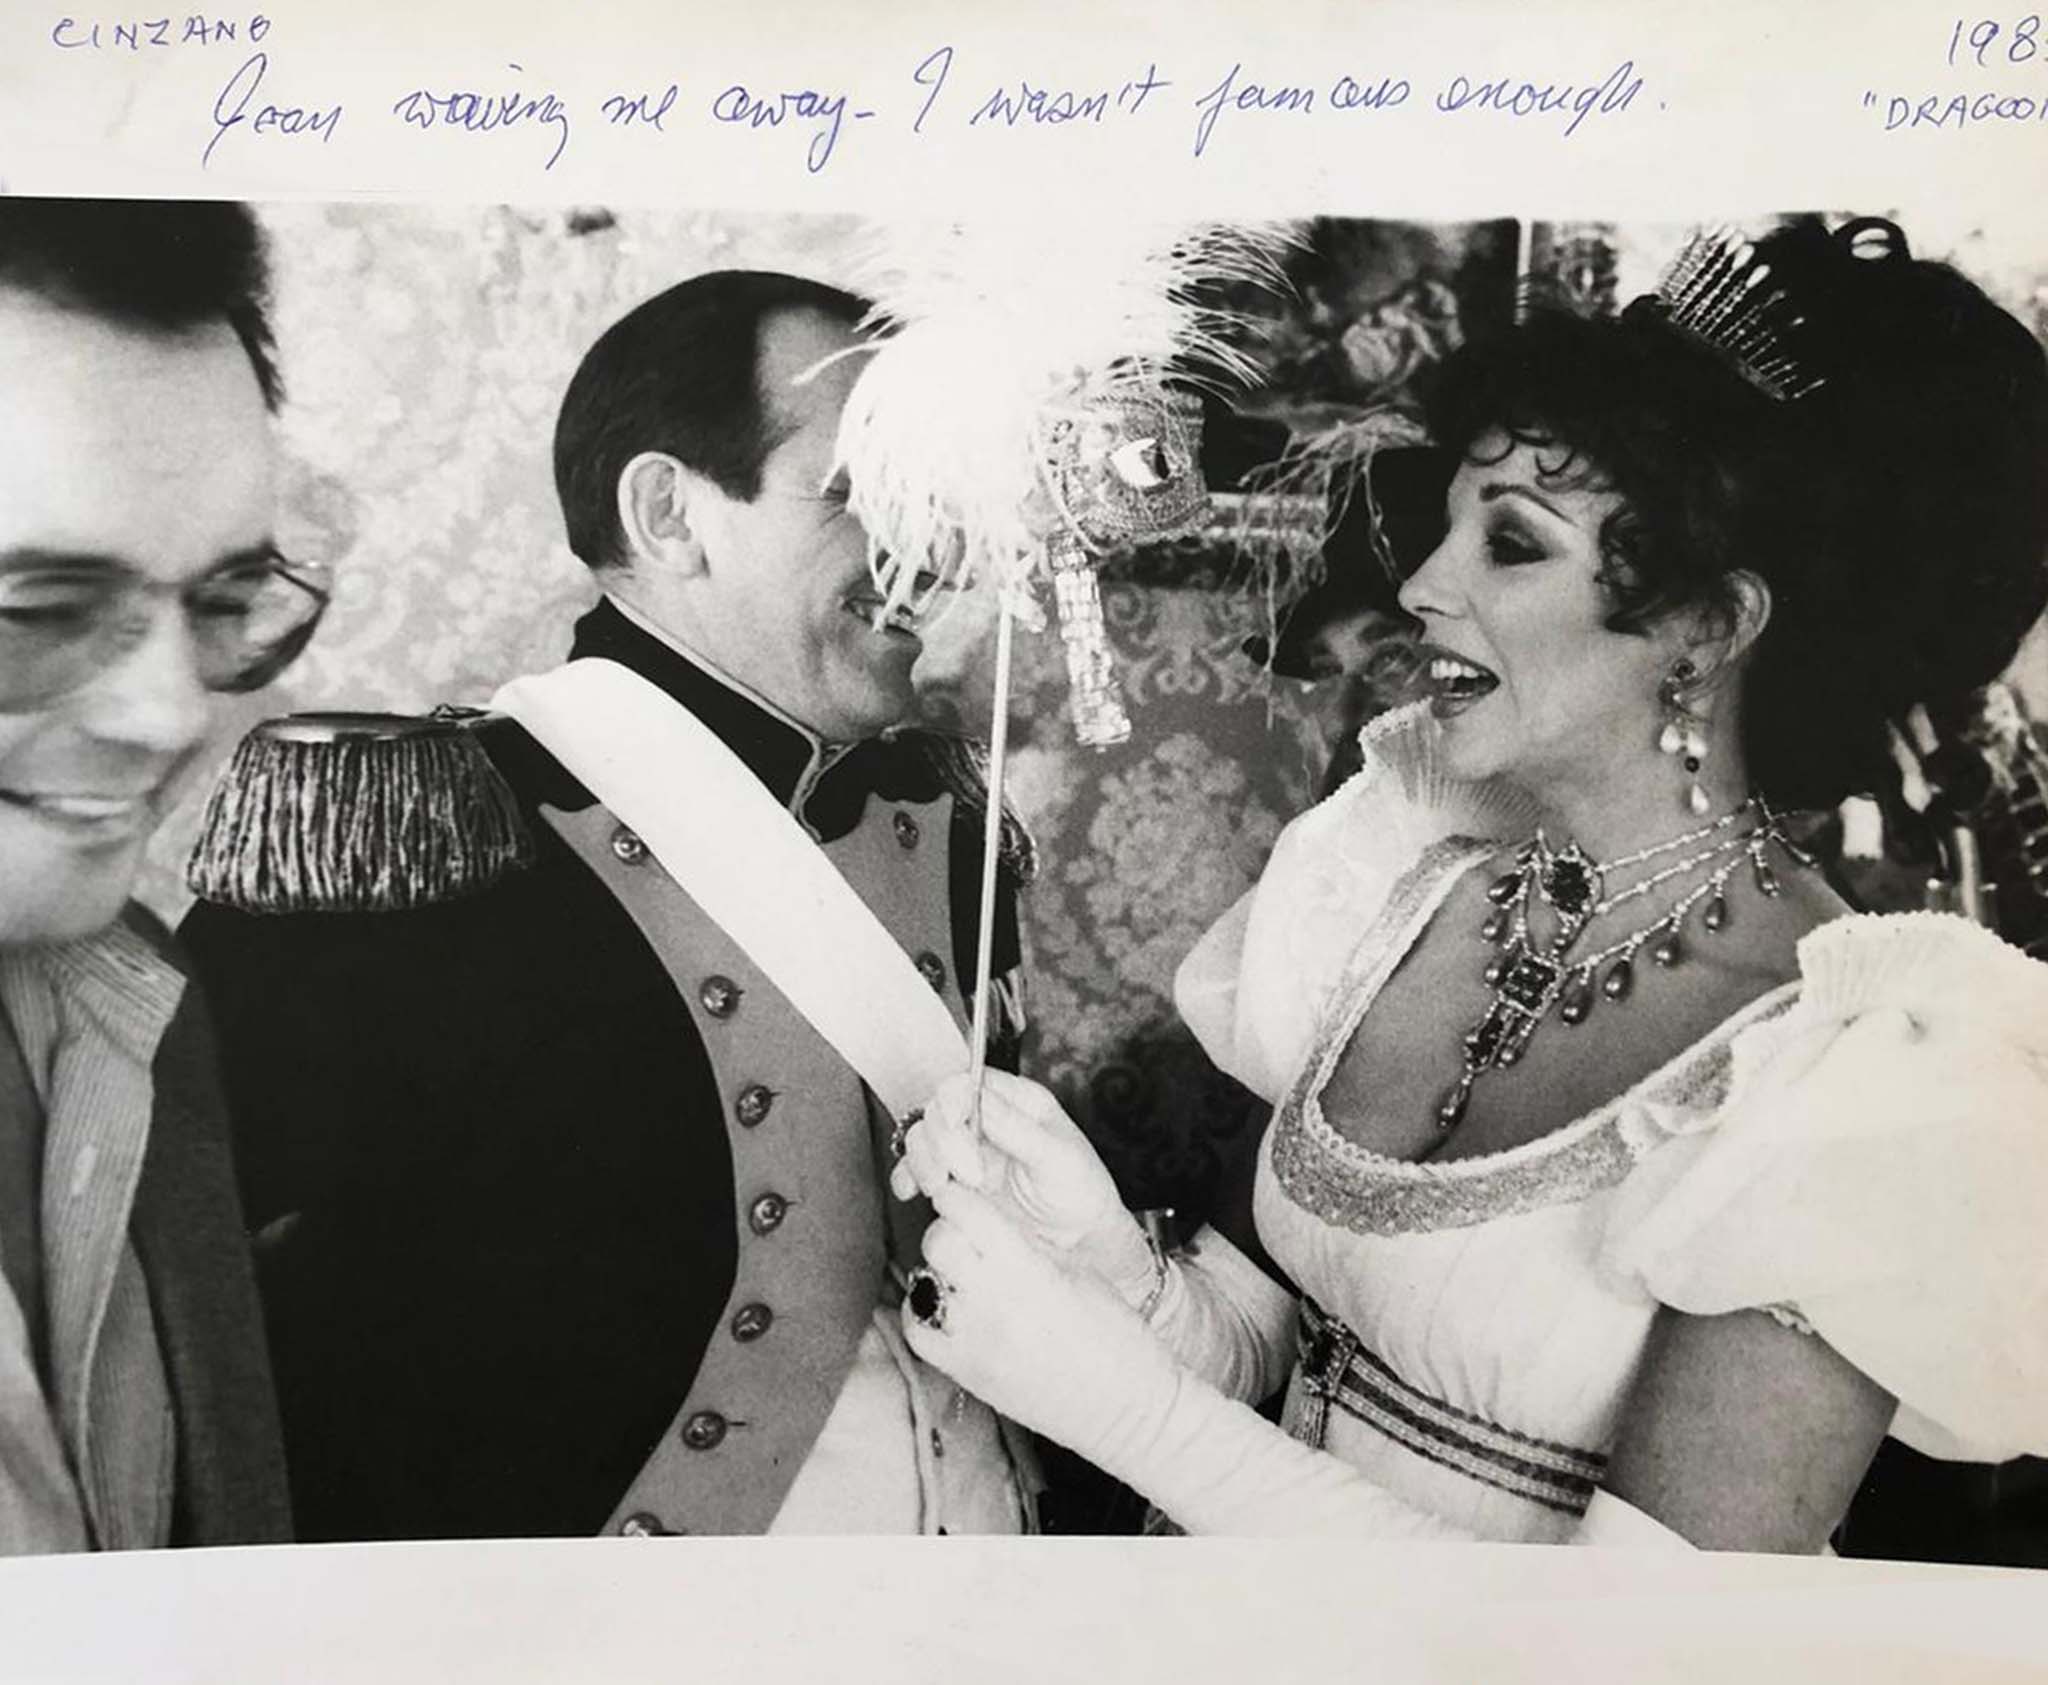 With Rossiter and Joan Collins on another Cinzano collaboration